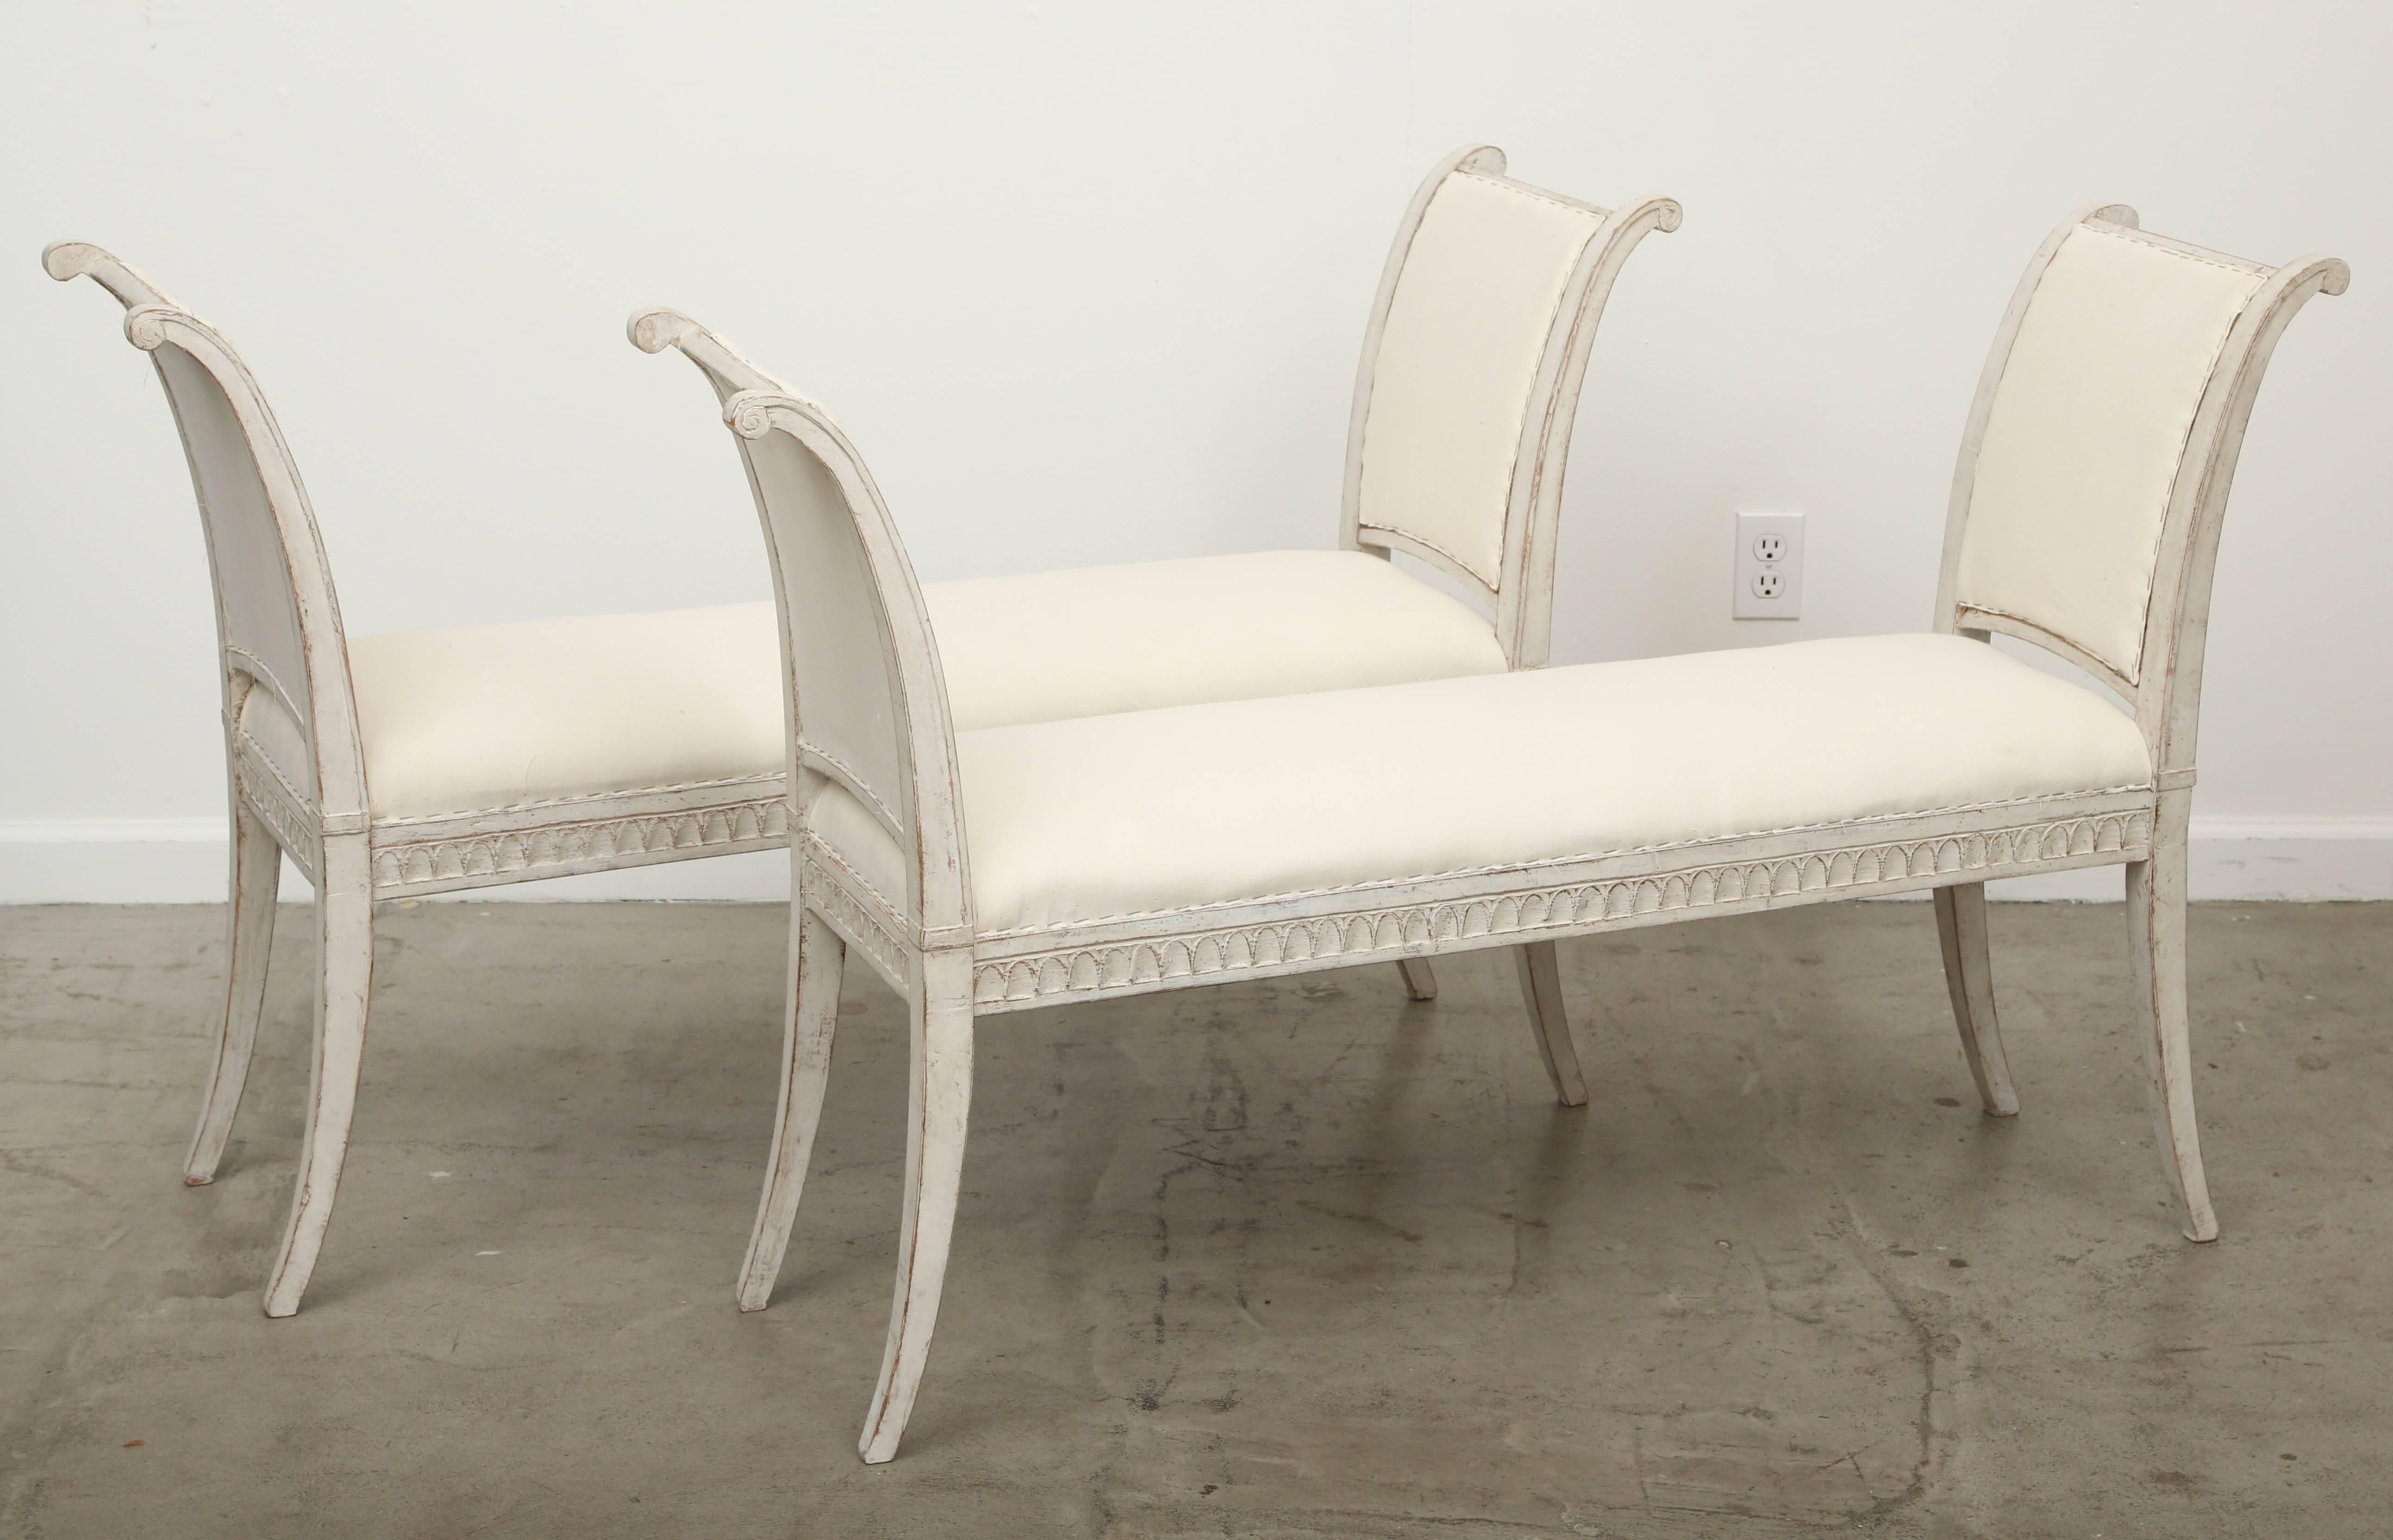 Painted Pair of Antique Swedish Gustavian Benches with Curved Arms, Mid-19th Century